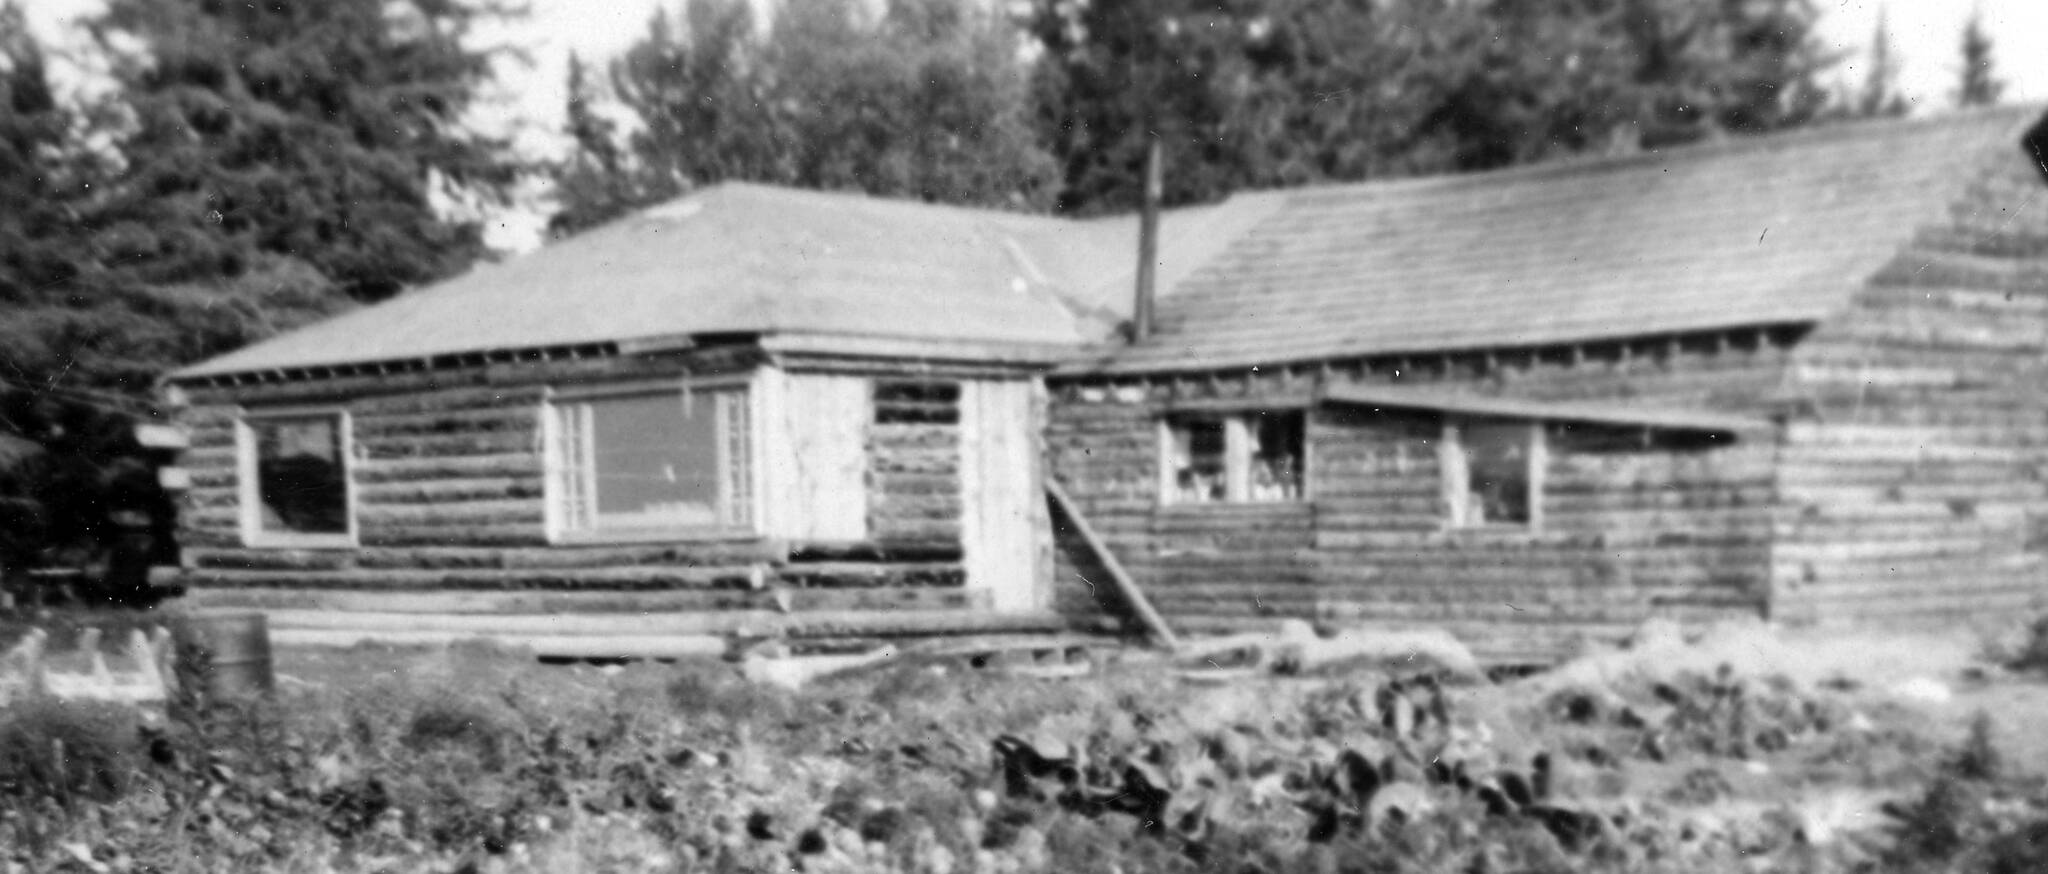 Photo courtesy of the Keeler Family Collection
Lawrence and Lorna Keeler’s family home near Stariski Creek in the early 1950s.